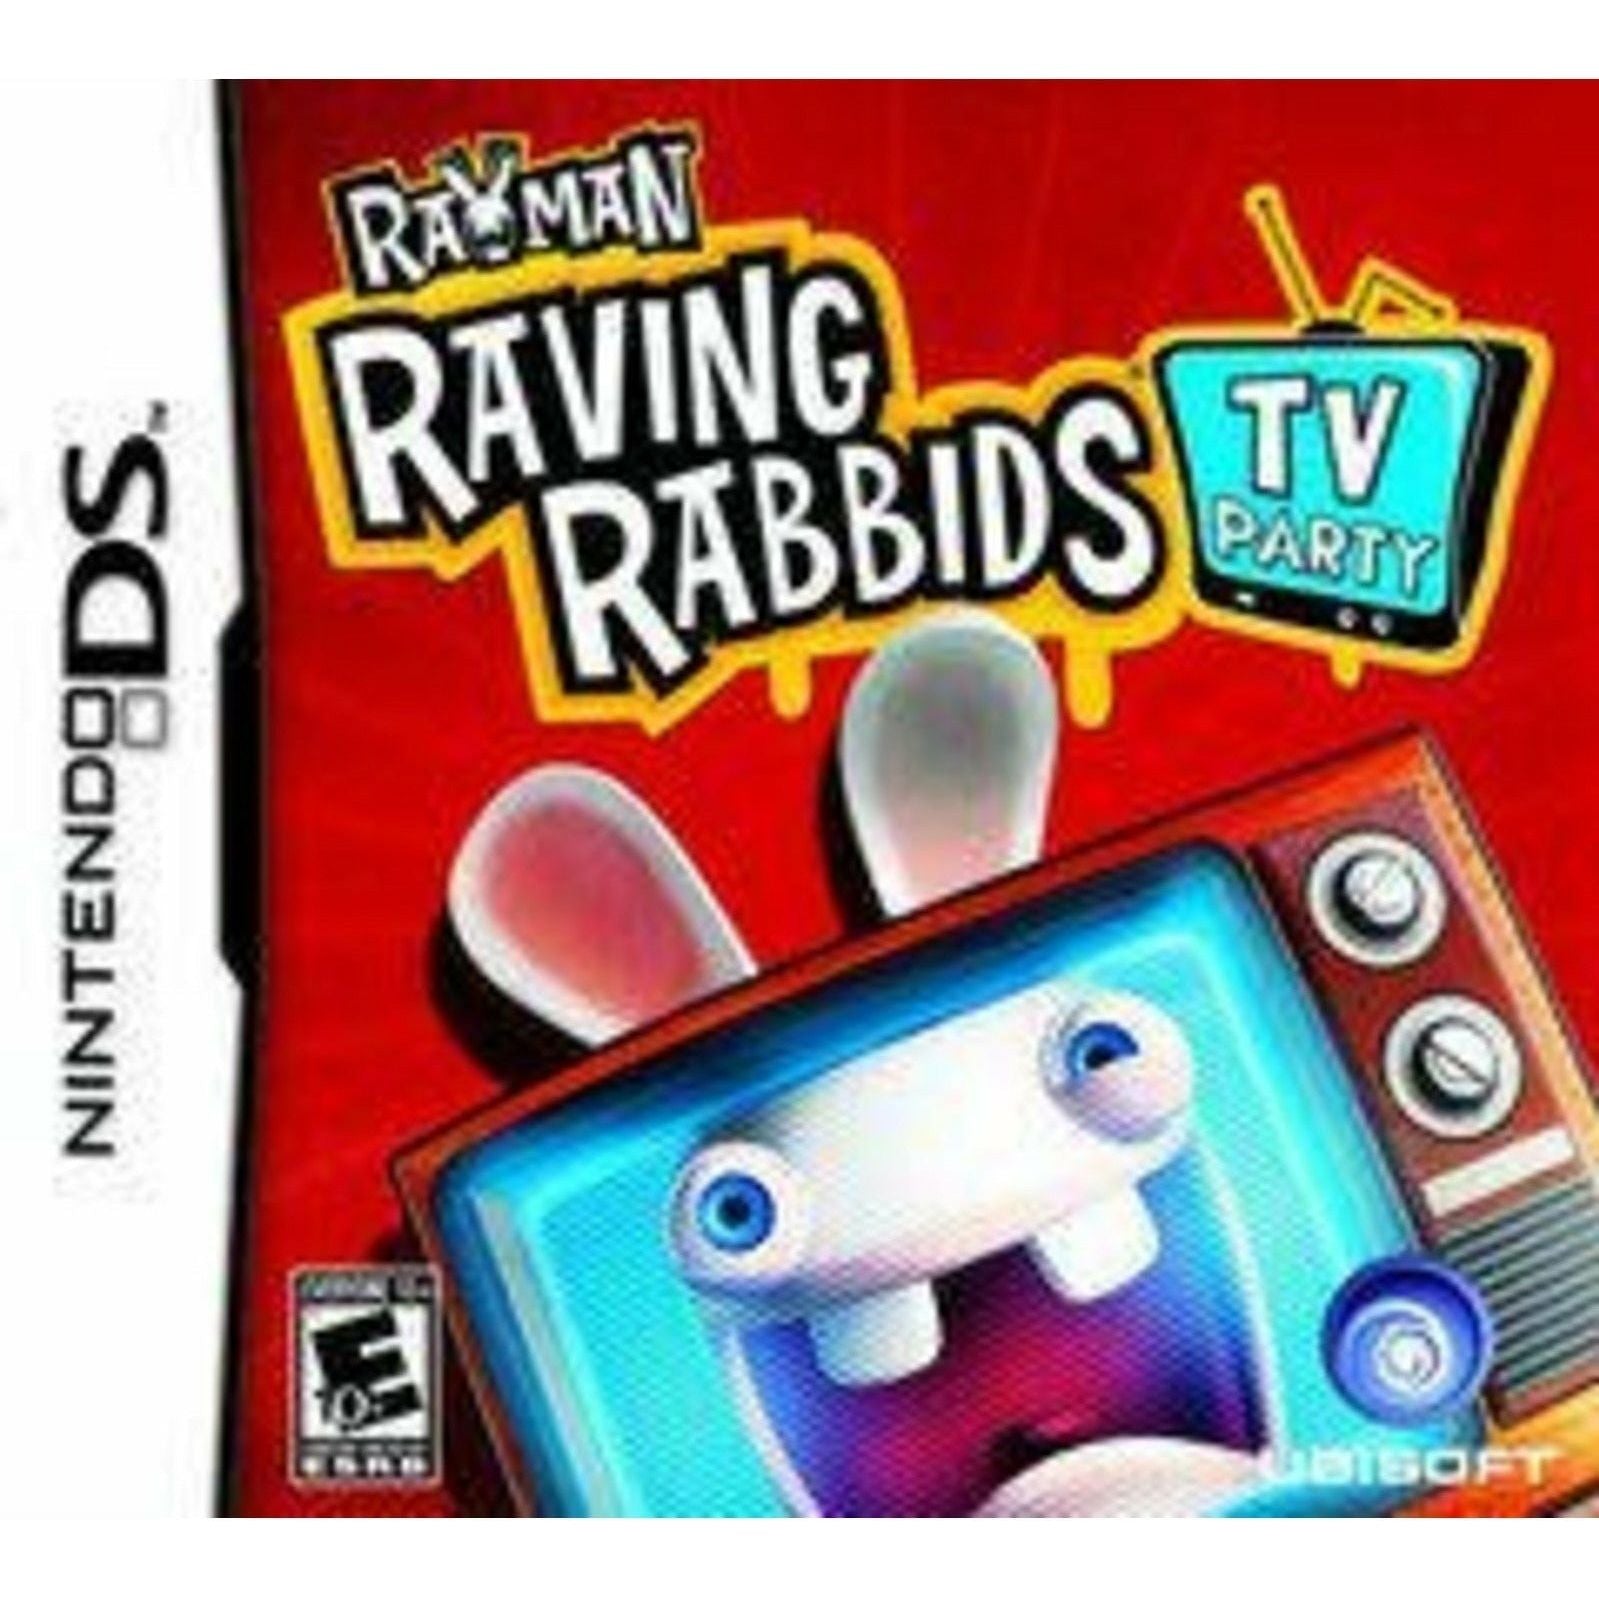 DS - Rayman Raving Rabbids TV Party (In Case)